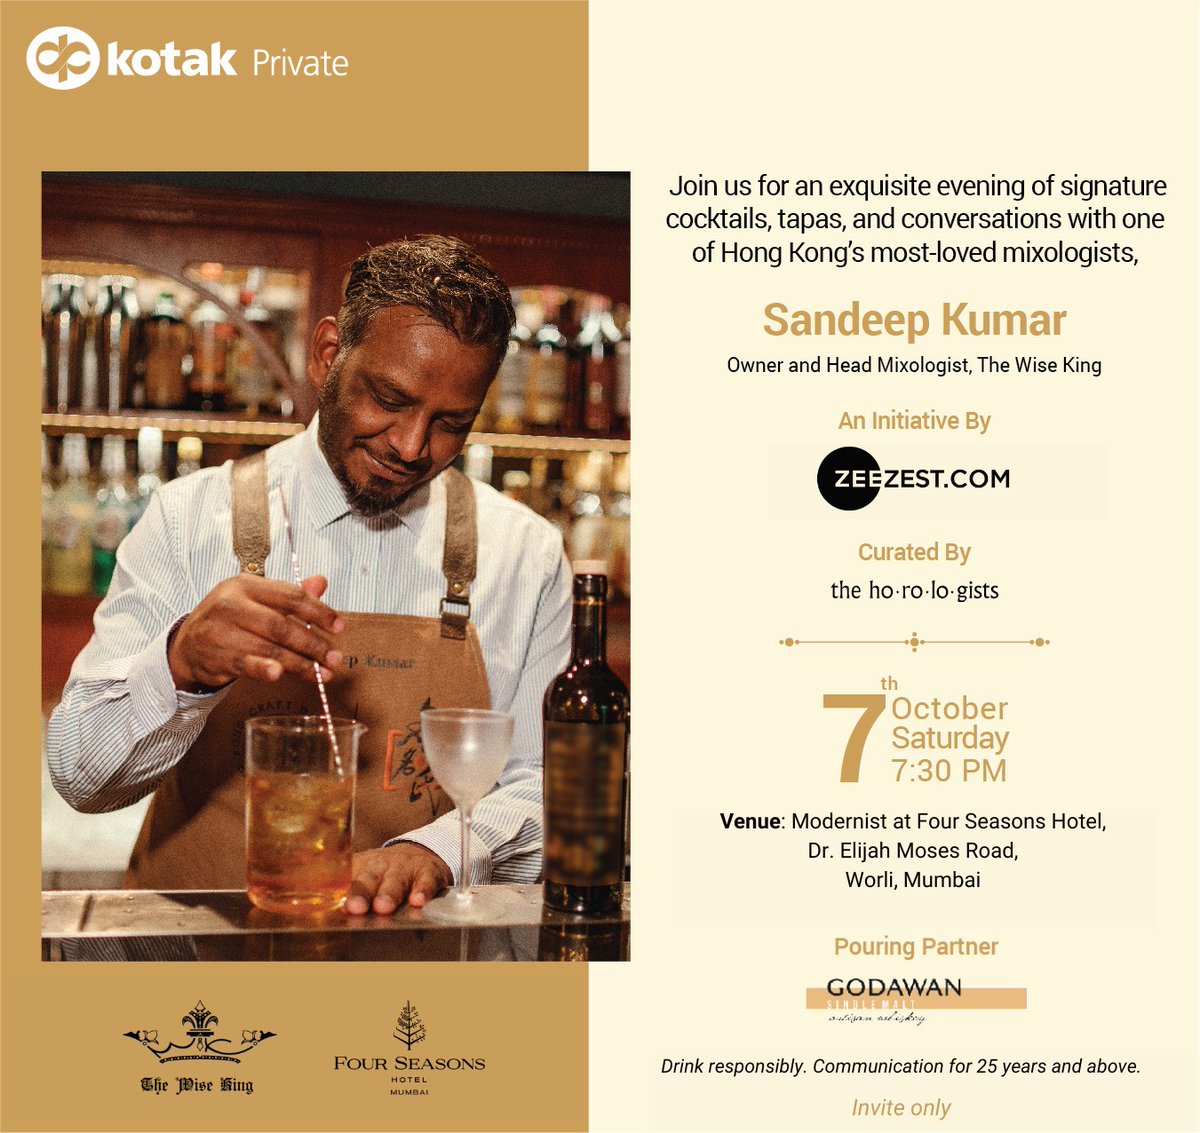 Sandeep Kumar, bartender extraordinaire & founder of The Wise King, joins the esteemed clients of Kotak Private at Modernist, Four Seasons Hotel Mumbai for cocktails & conversation. A special initiative by @ZeeZest_ #TheWiseKing #Modernist #TheHorologists #FSMumbai #ZeeZest